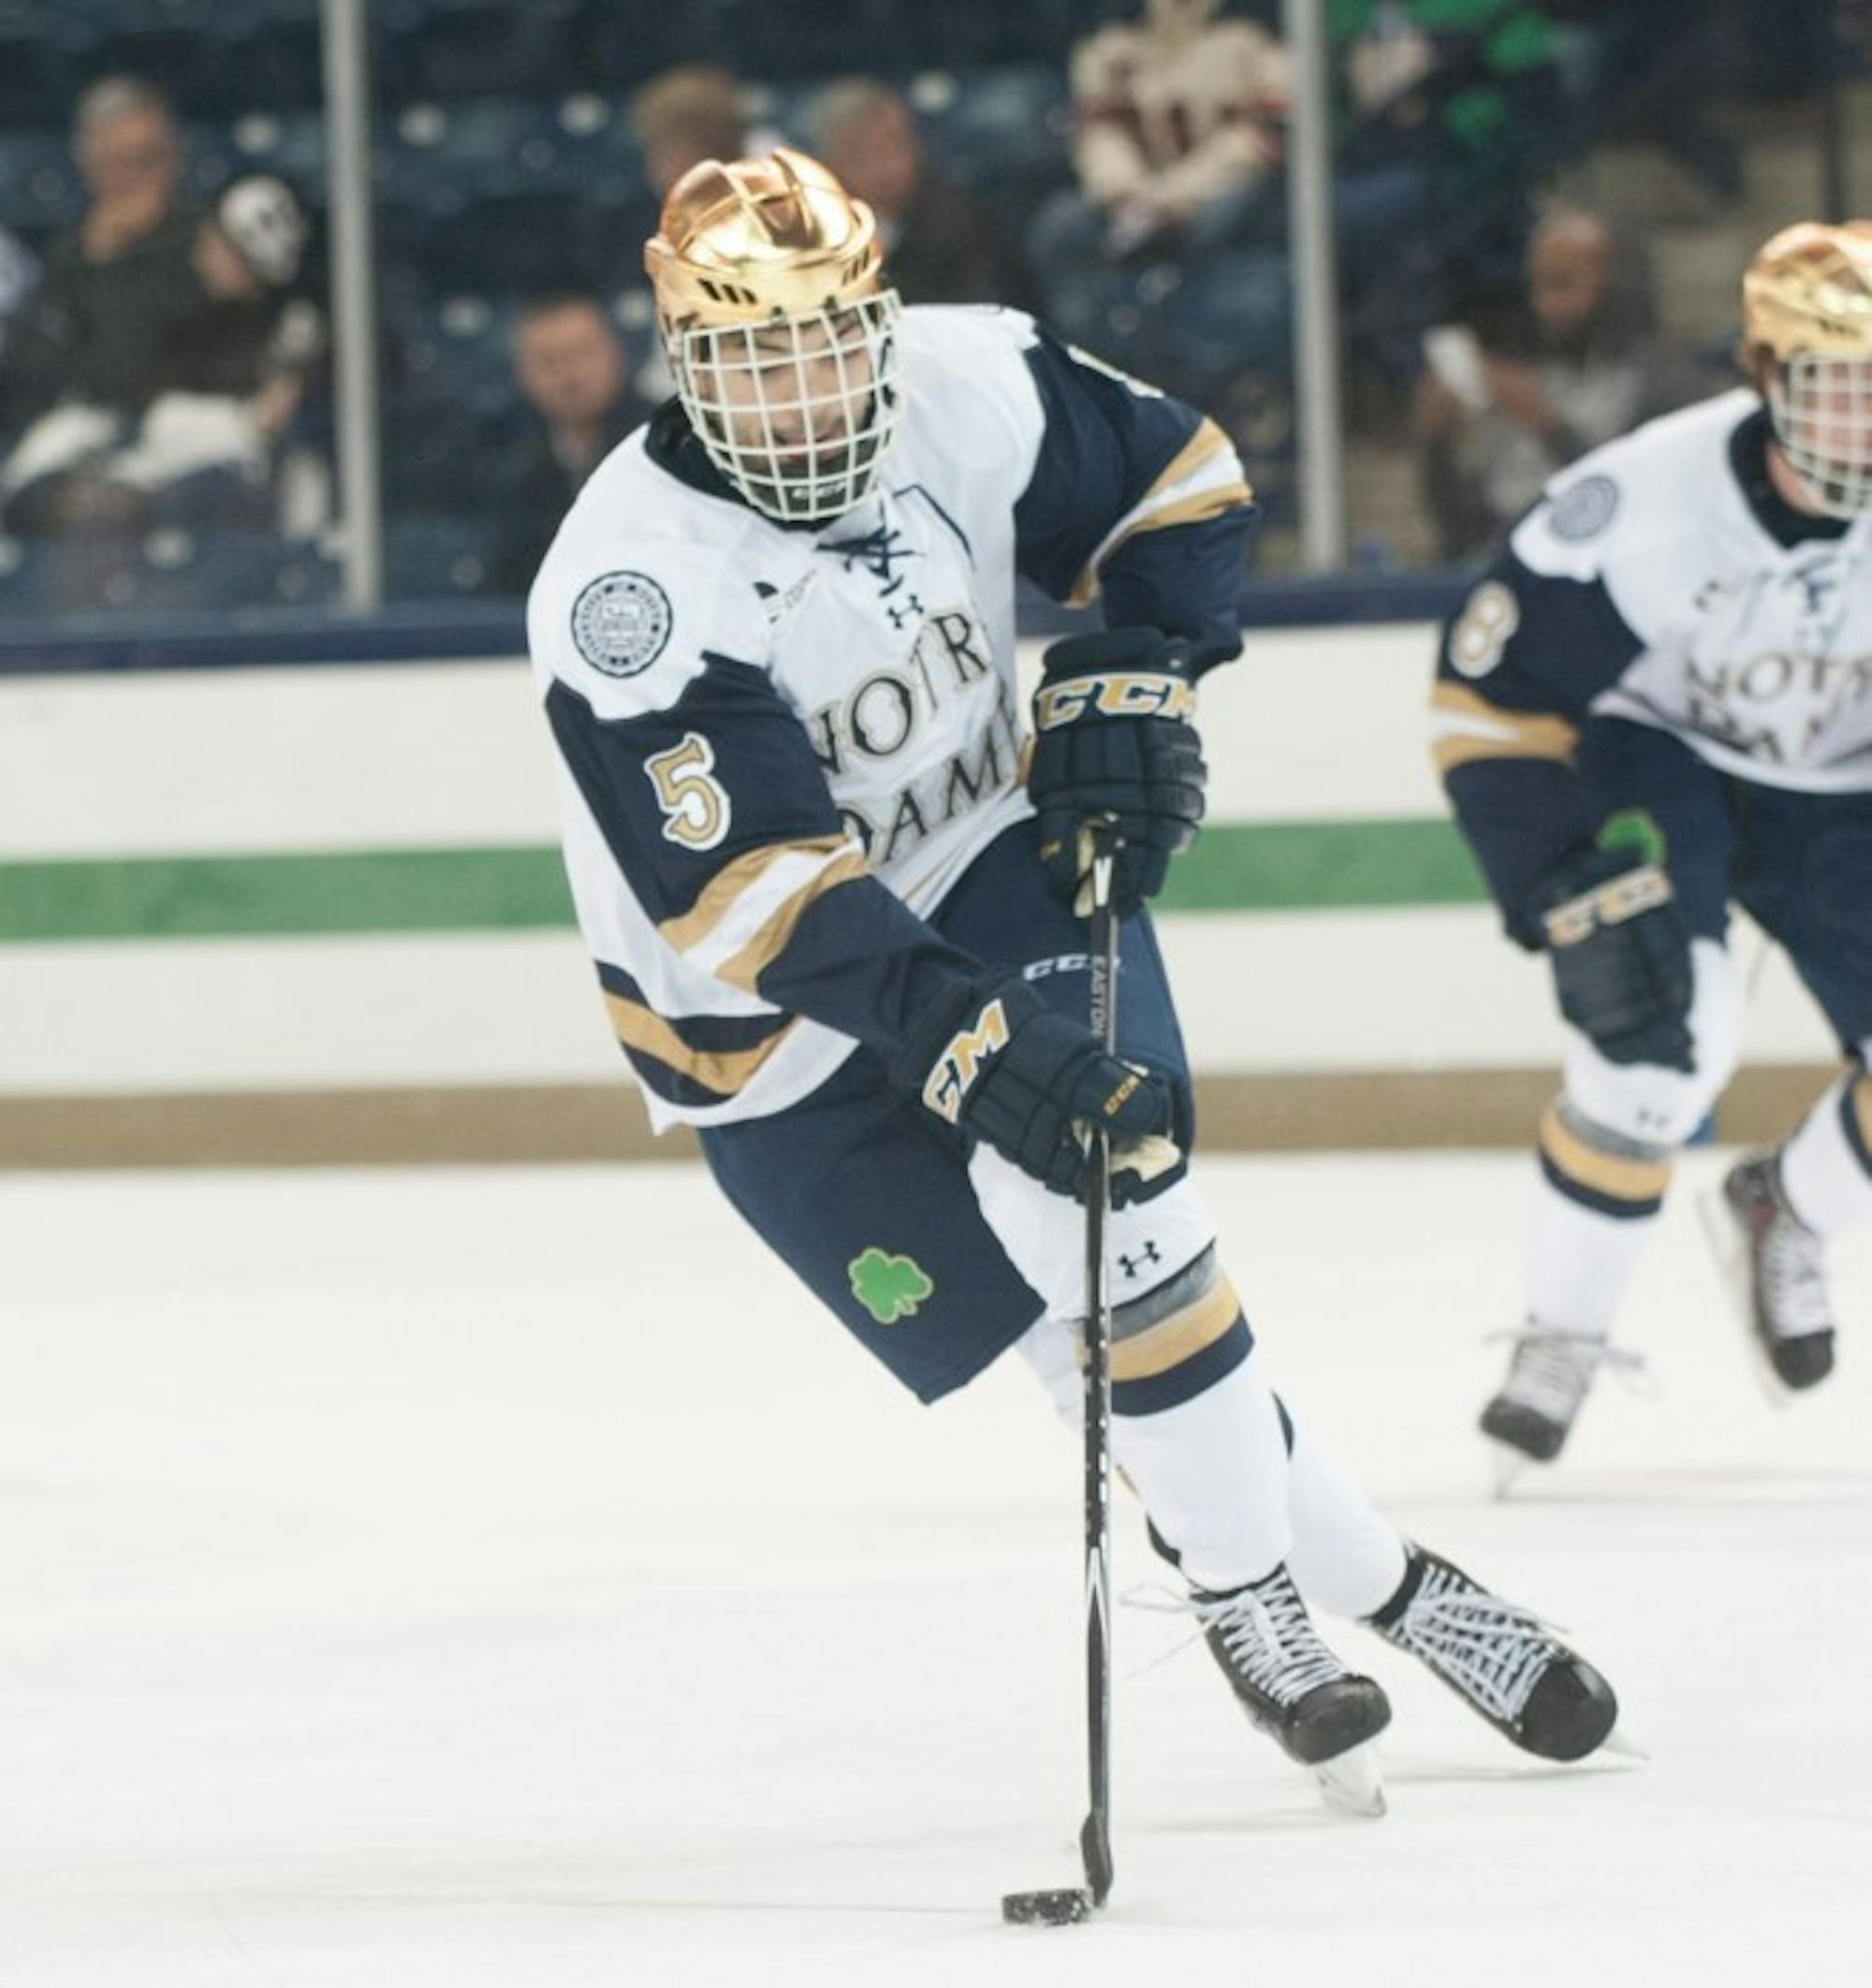 Irish senior defenseman Robbie Russo handles the puck while moving up ice Oct. 10 against Rensselaer at Compton Family Ice Arena. Rensselaer won 3-2.